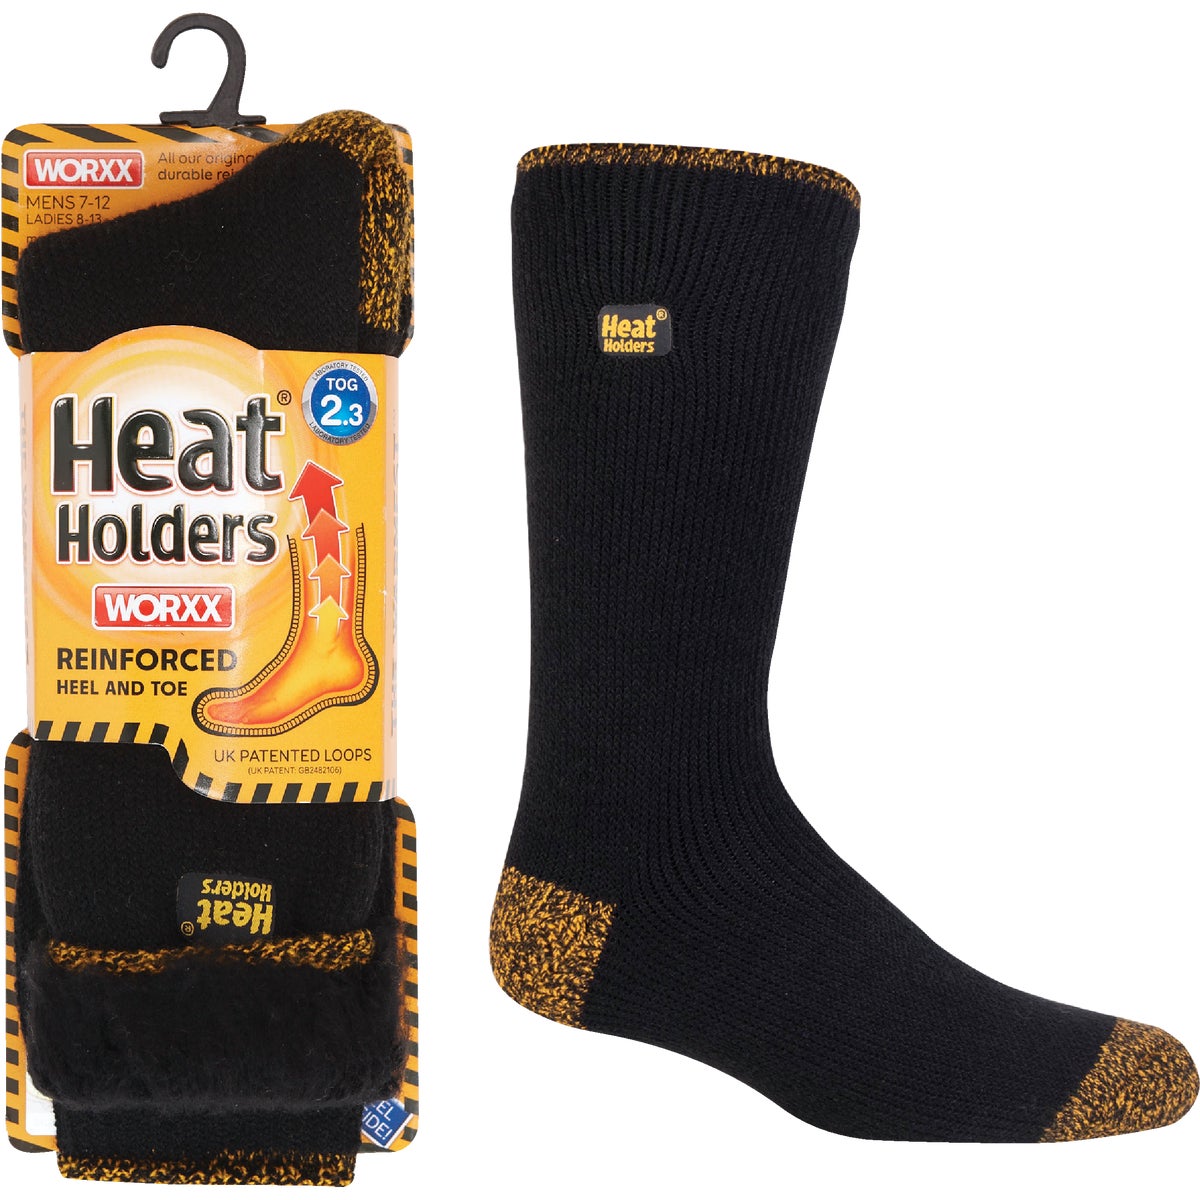 Item 704978, Thermal sock featuring durable reinforced heel and toe.